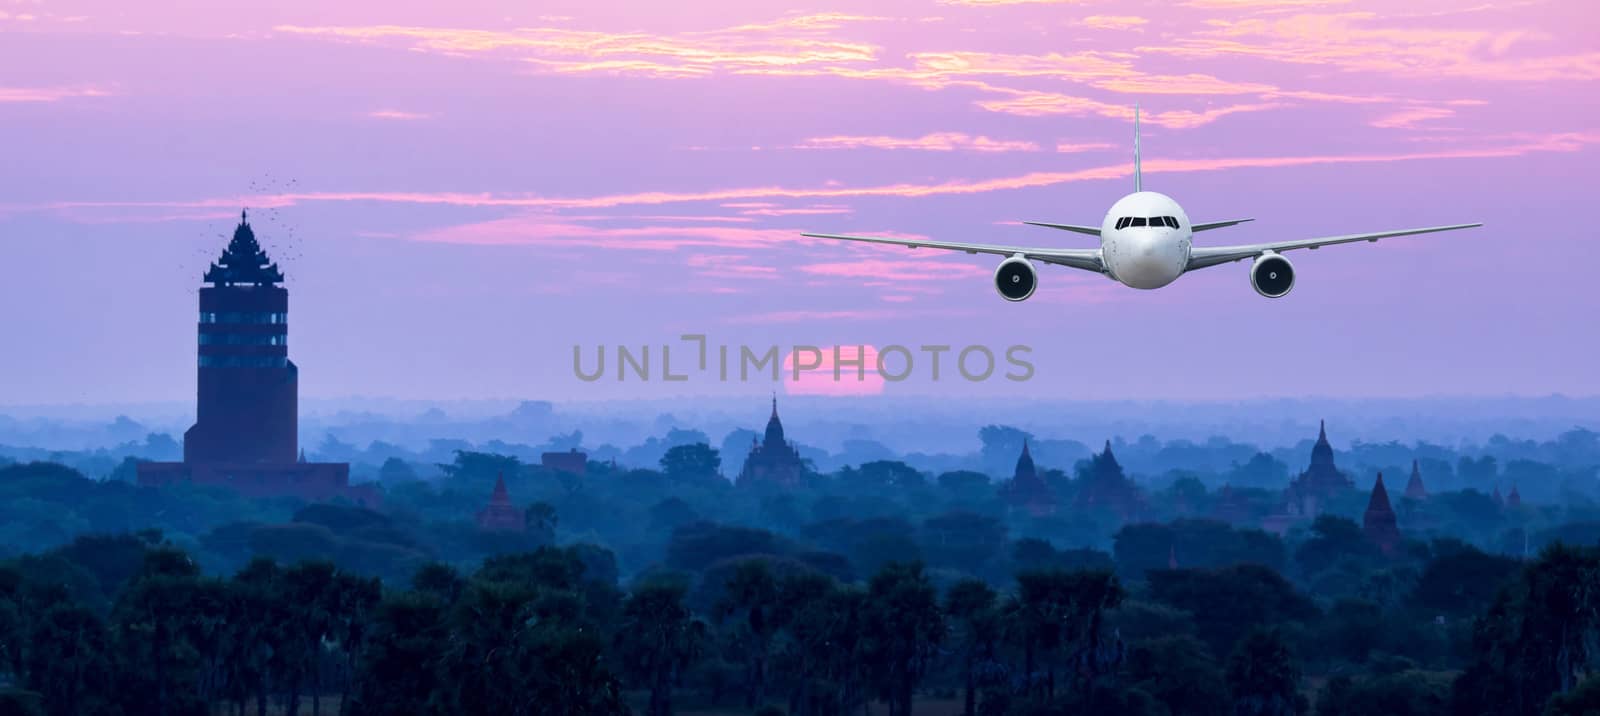 Front of real plane aircraft, on Pagoda Sunset in Bagan,Myanmar  by Surasak